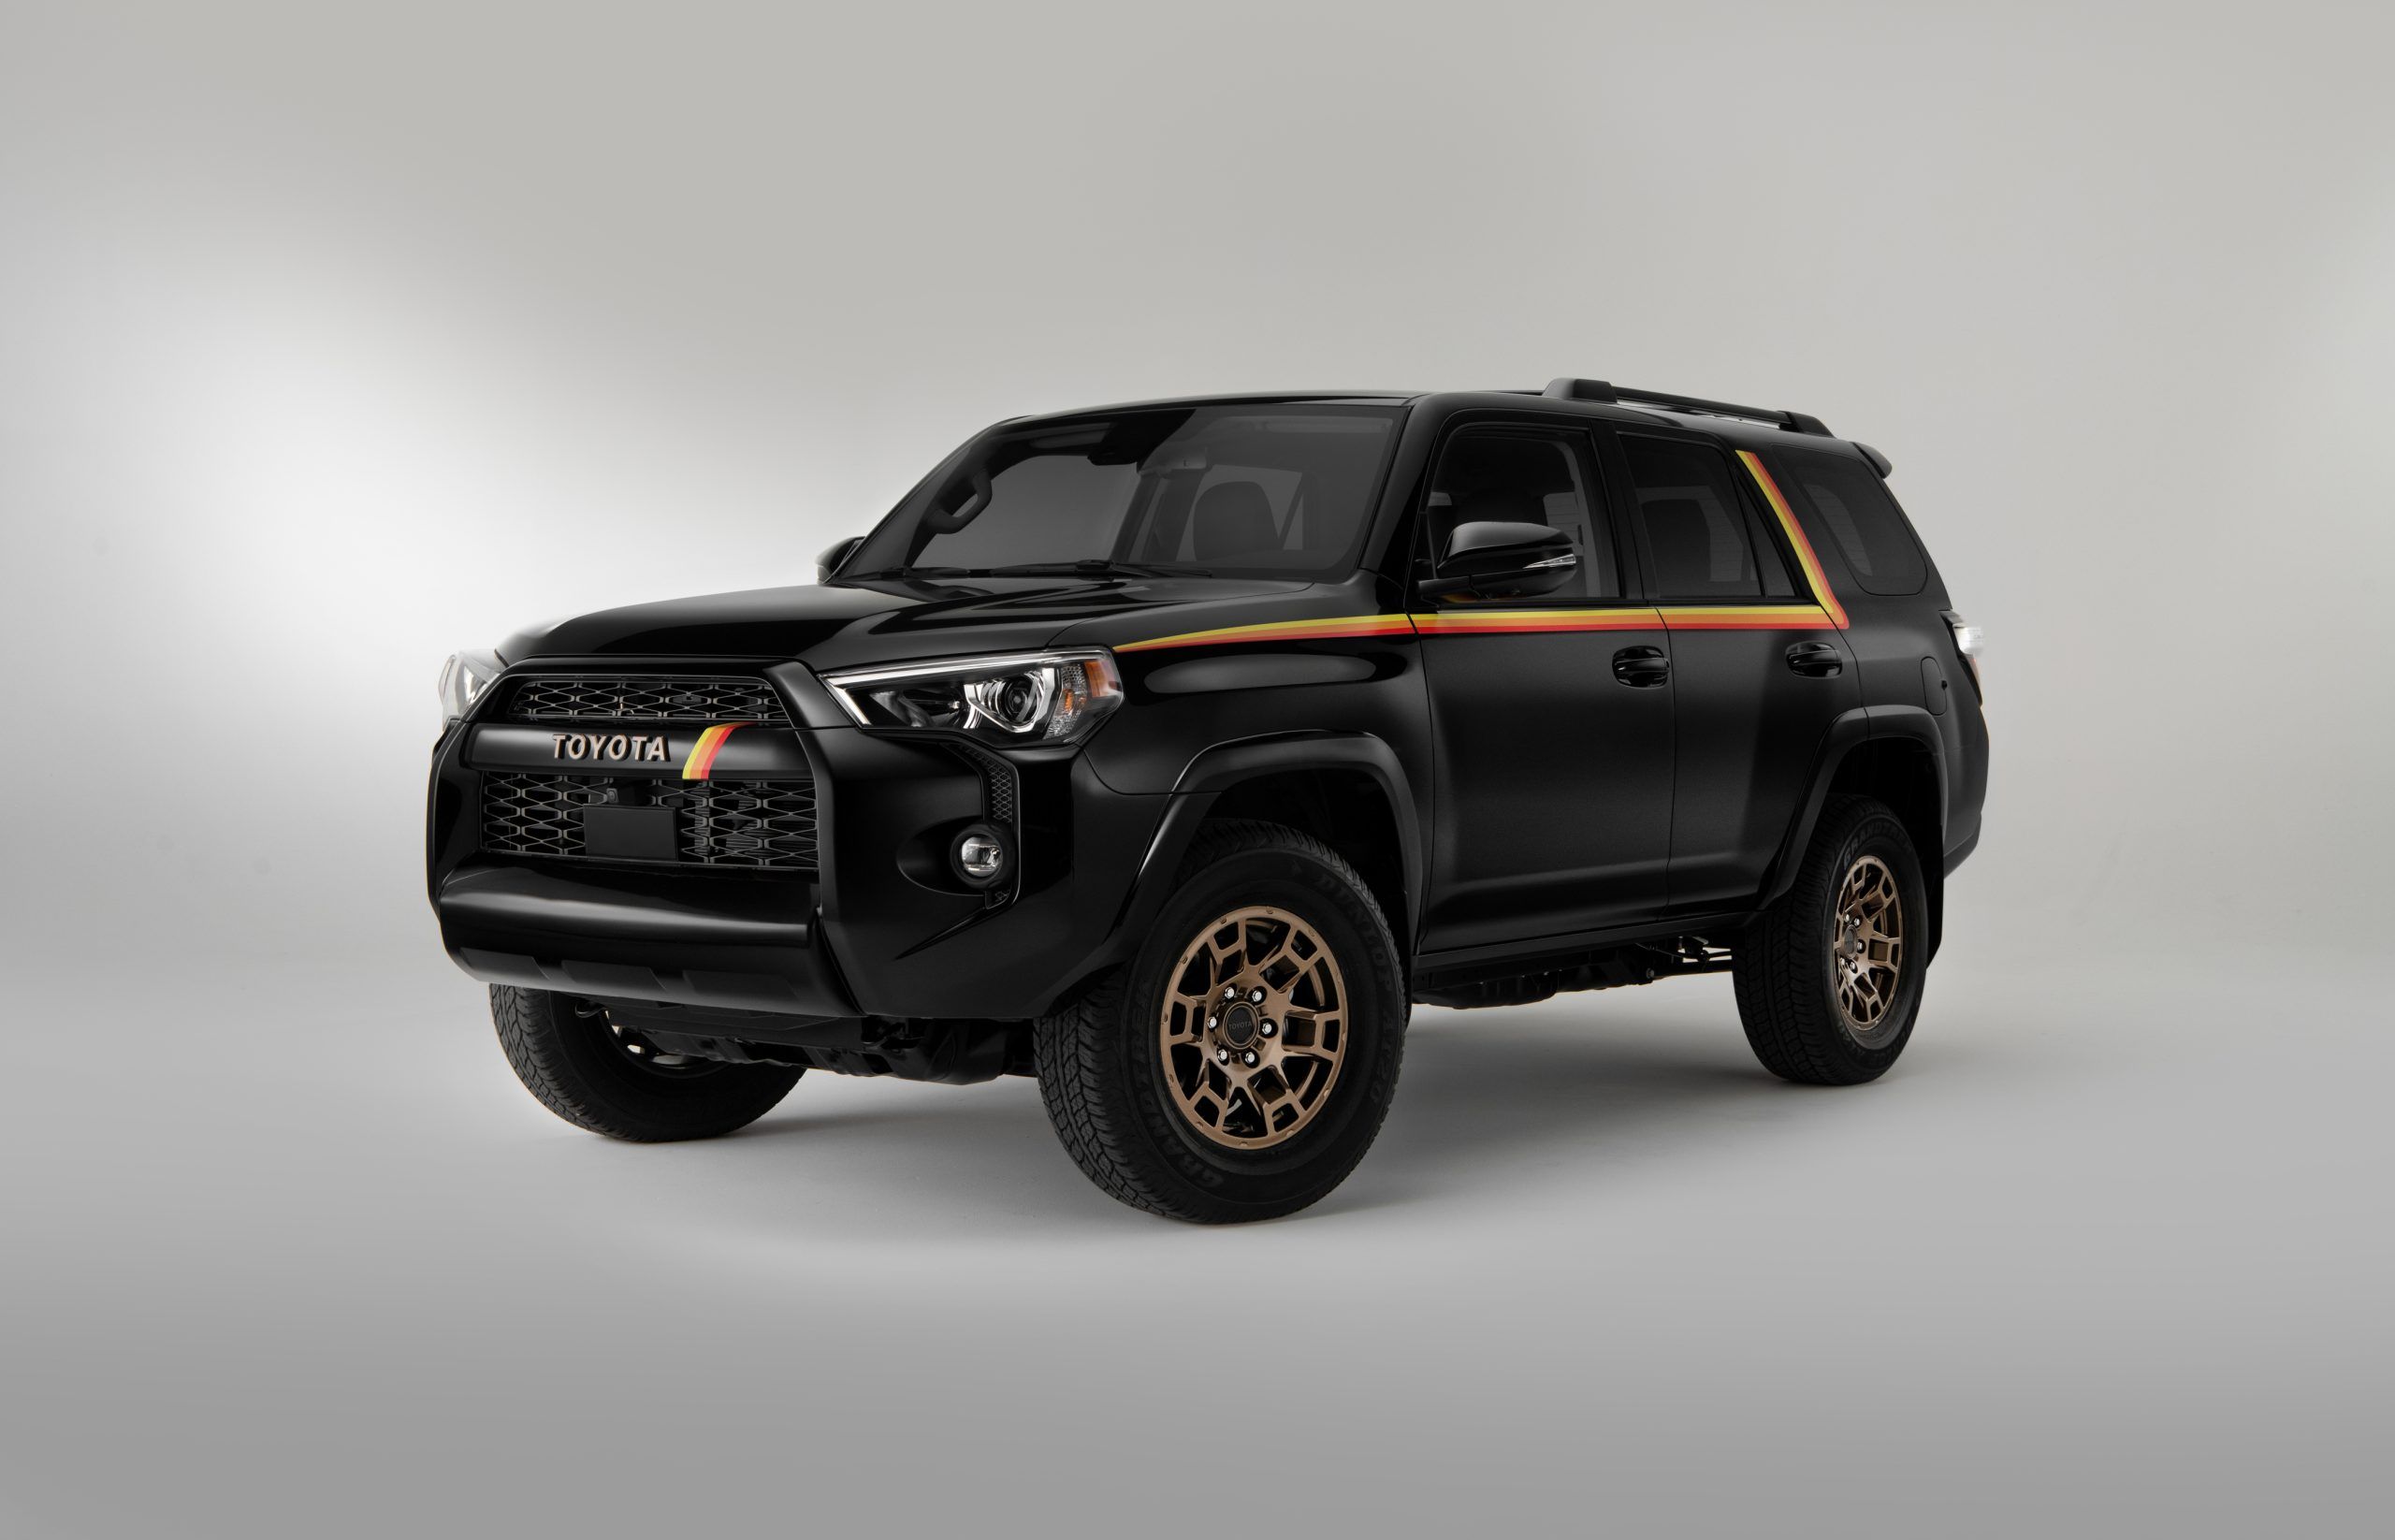 Used Toyota 4Runner for Sale